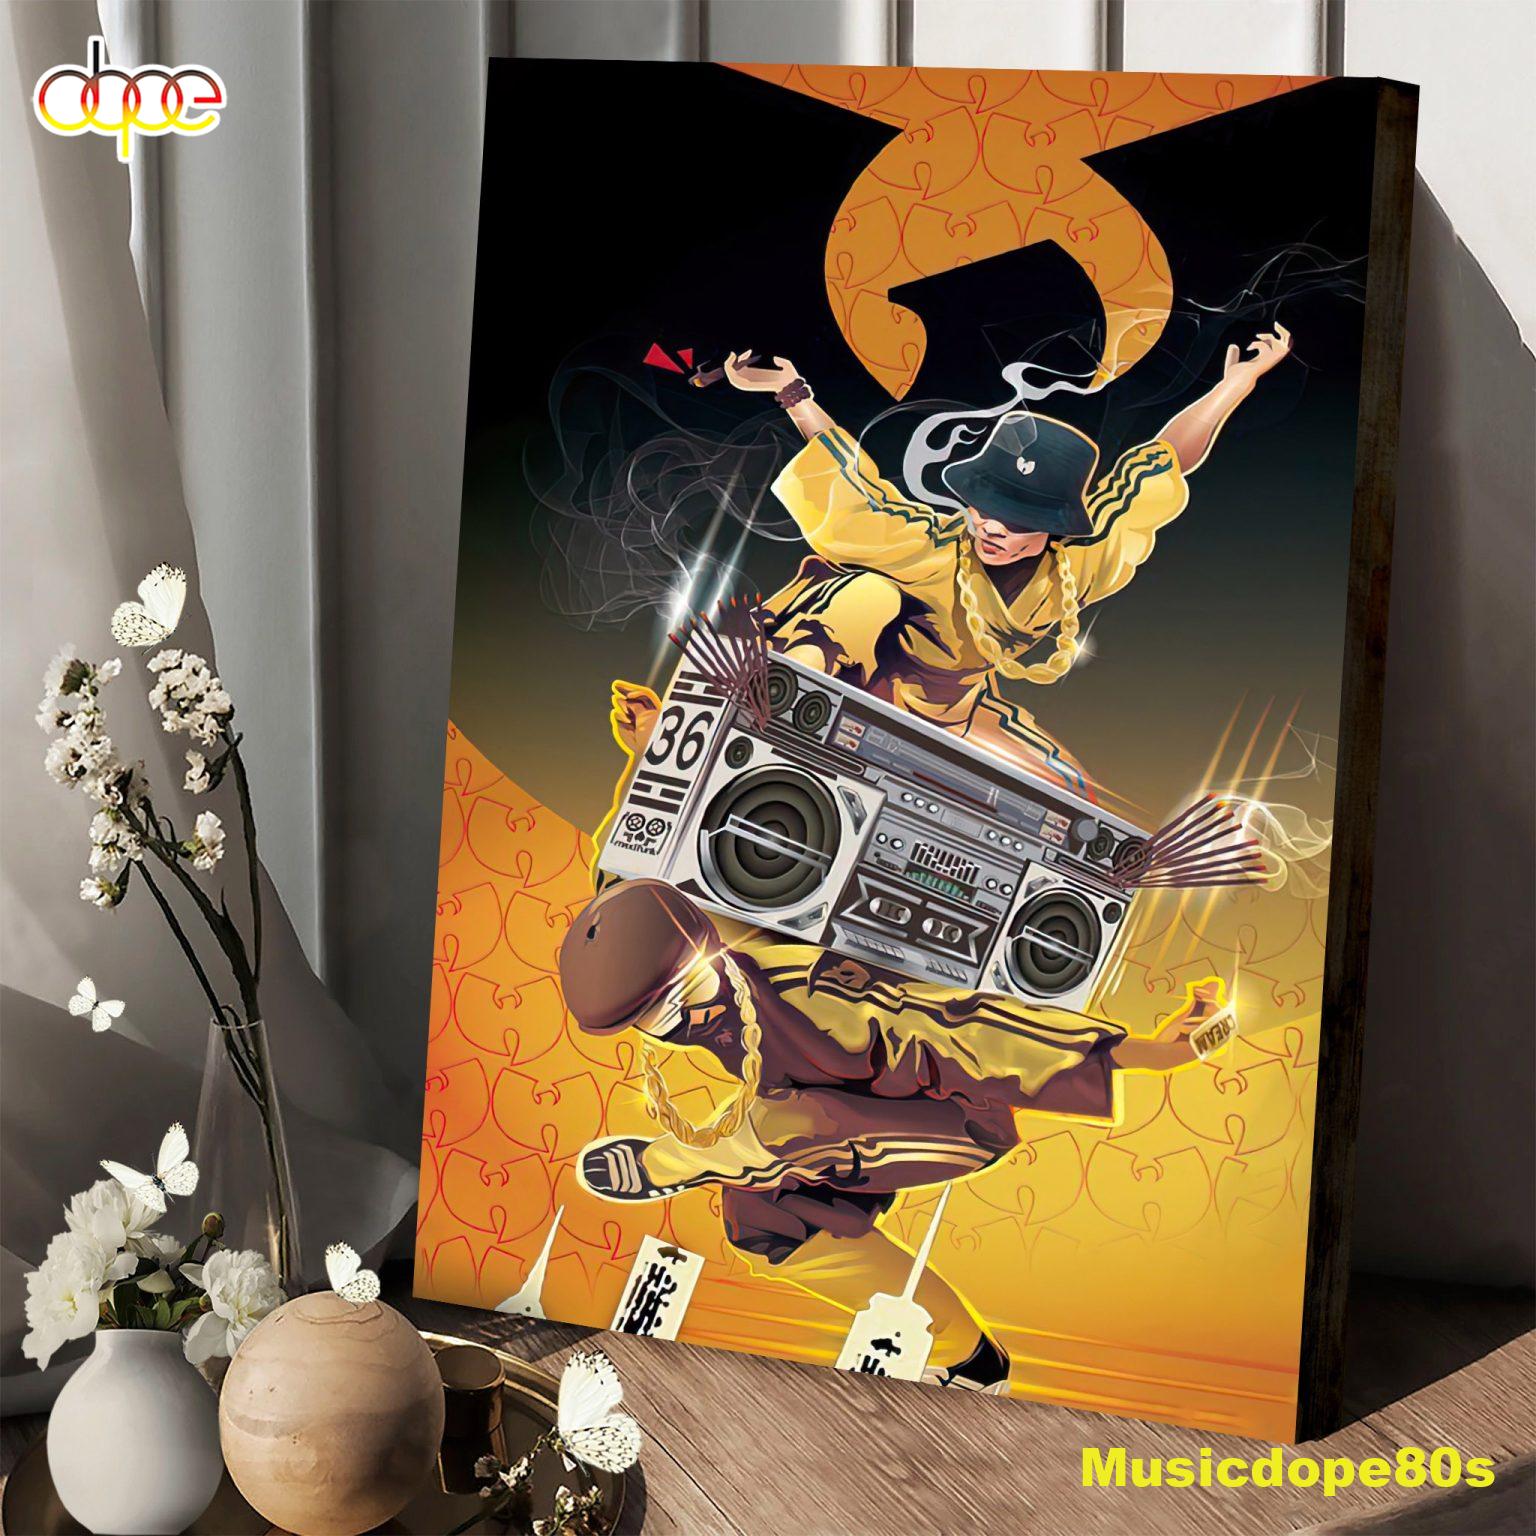 Wu-Tang Clan NY State of Mind Tour 2022 Toronto Canada Poster Canvas